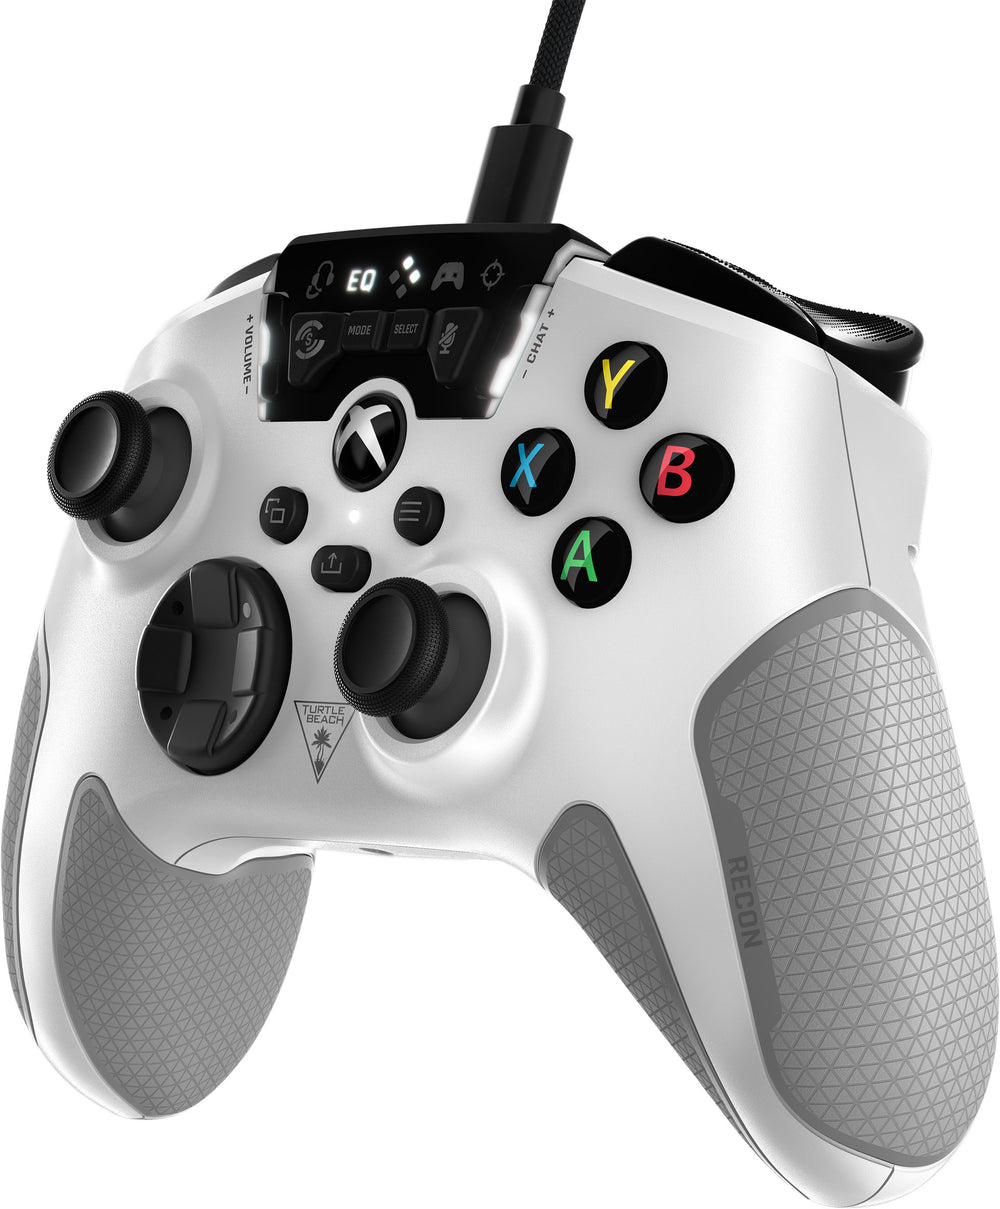 Turtle Beach - Recon Controller Wired Controller for Xbox Series X, Xbox Series S, Xbox One & Windows PCs with Remappable Buttons - White_1